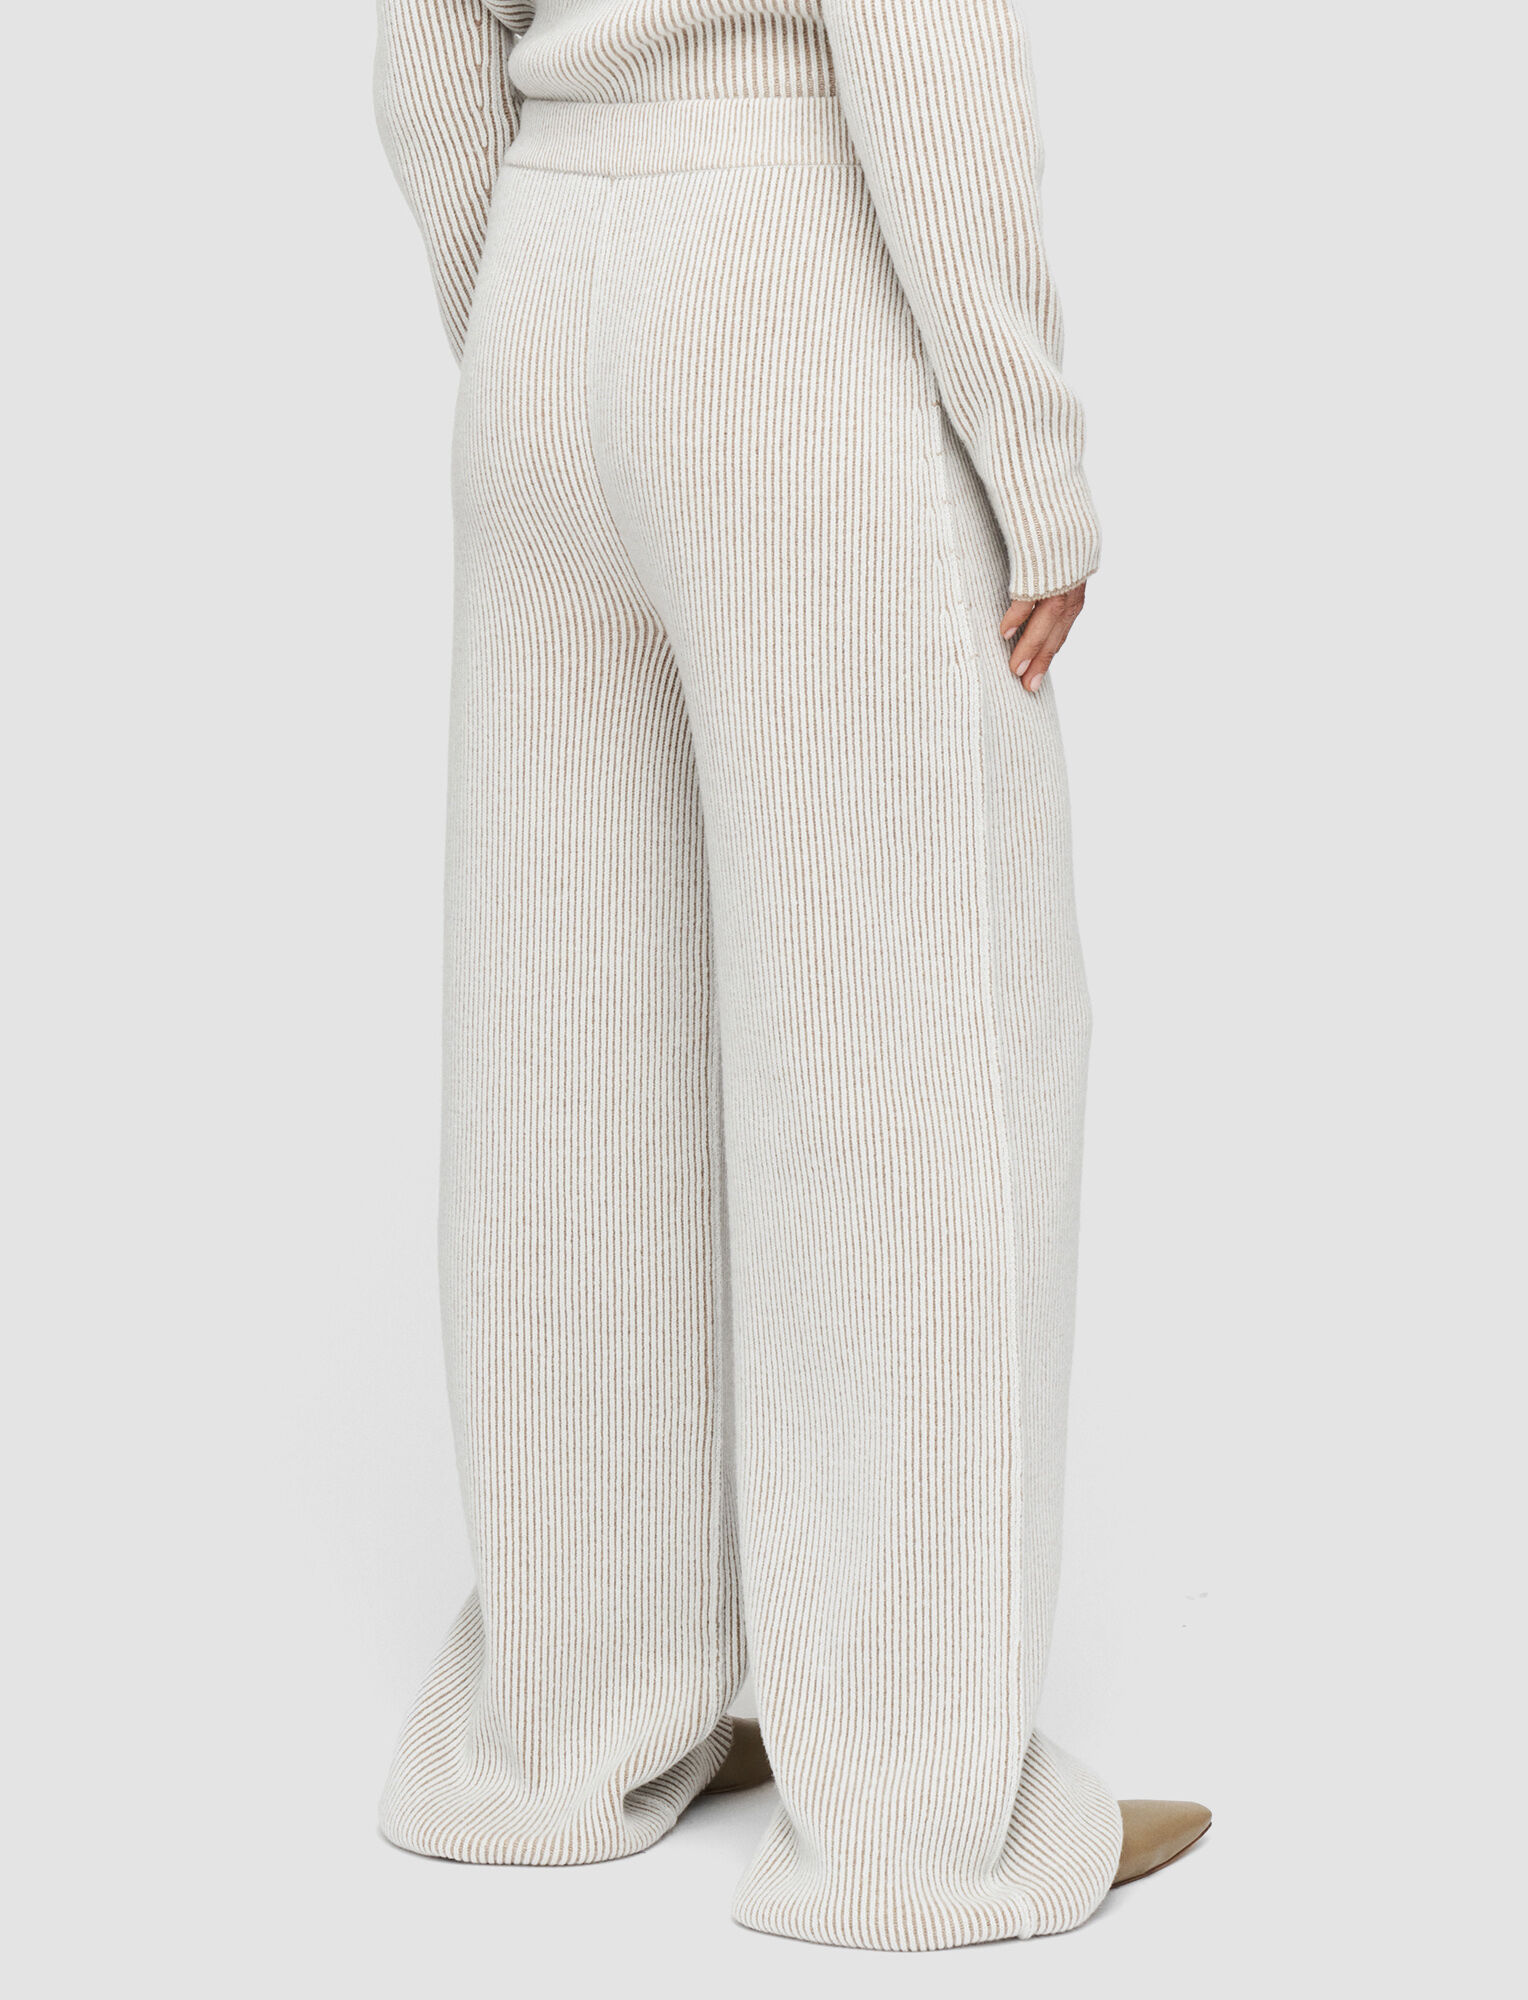 Joseph, Plated Knit Trousers – Shorter Length, in Pewter Combo